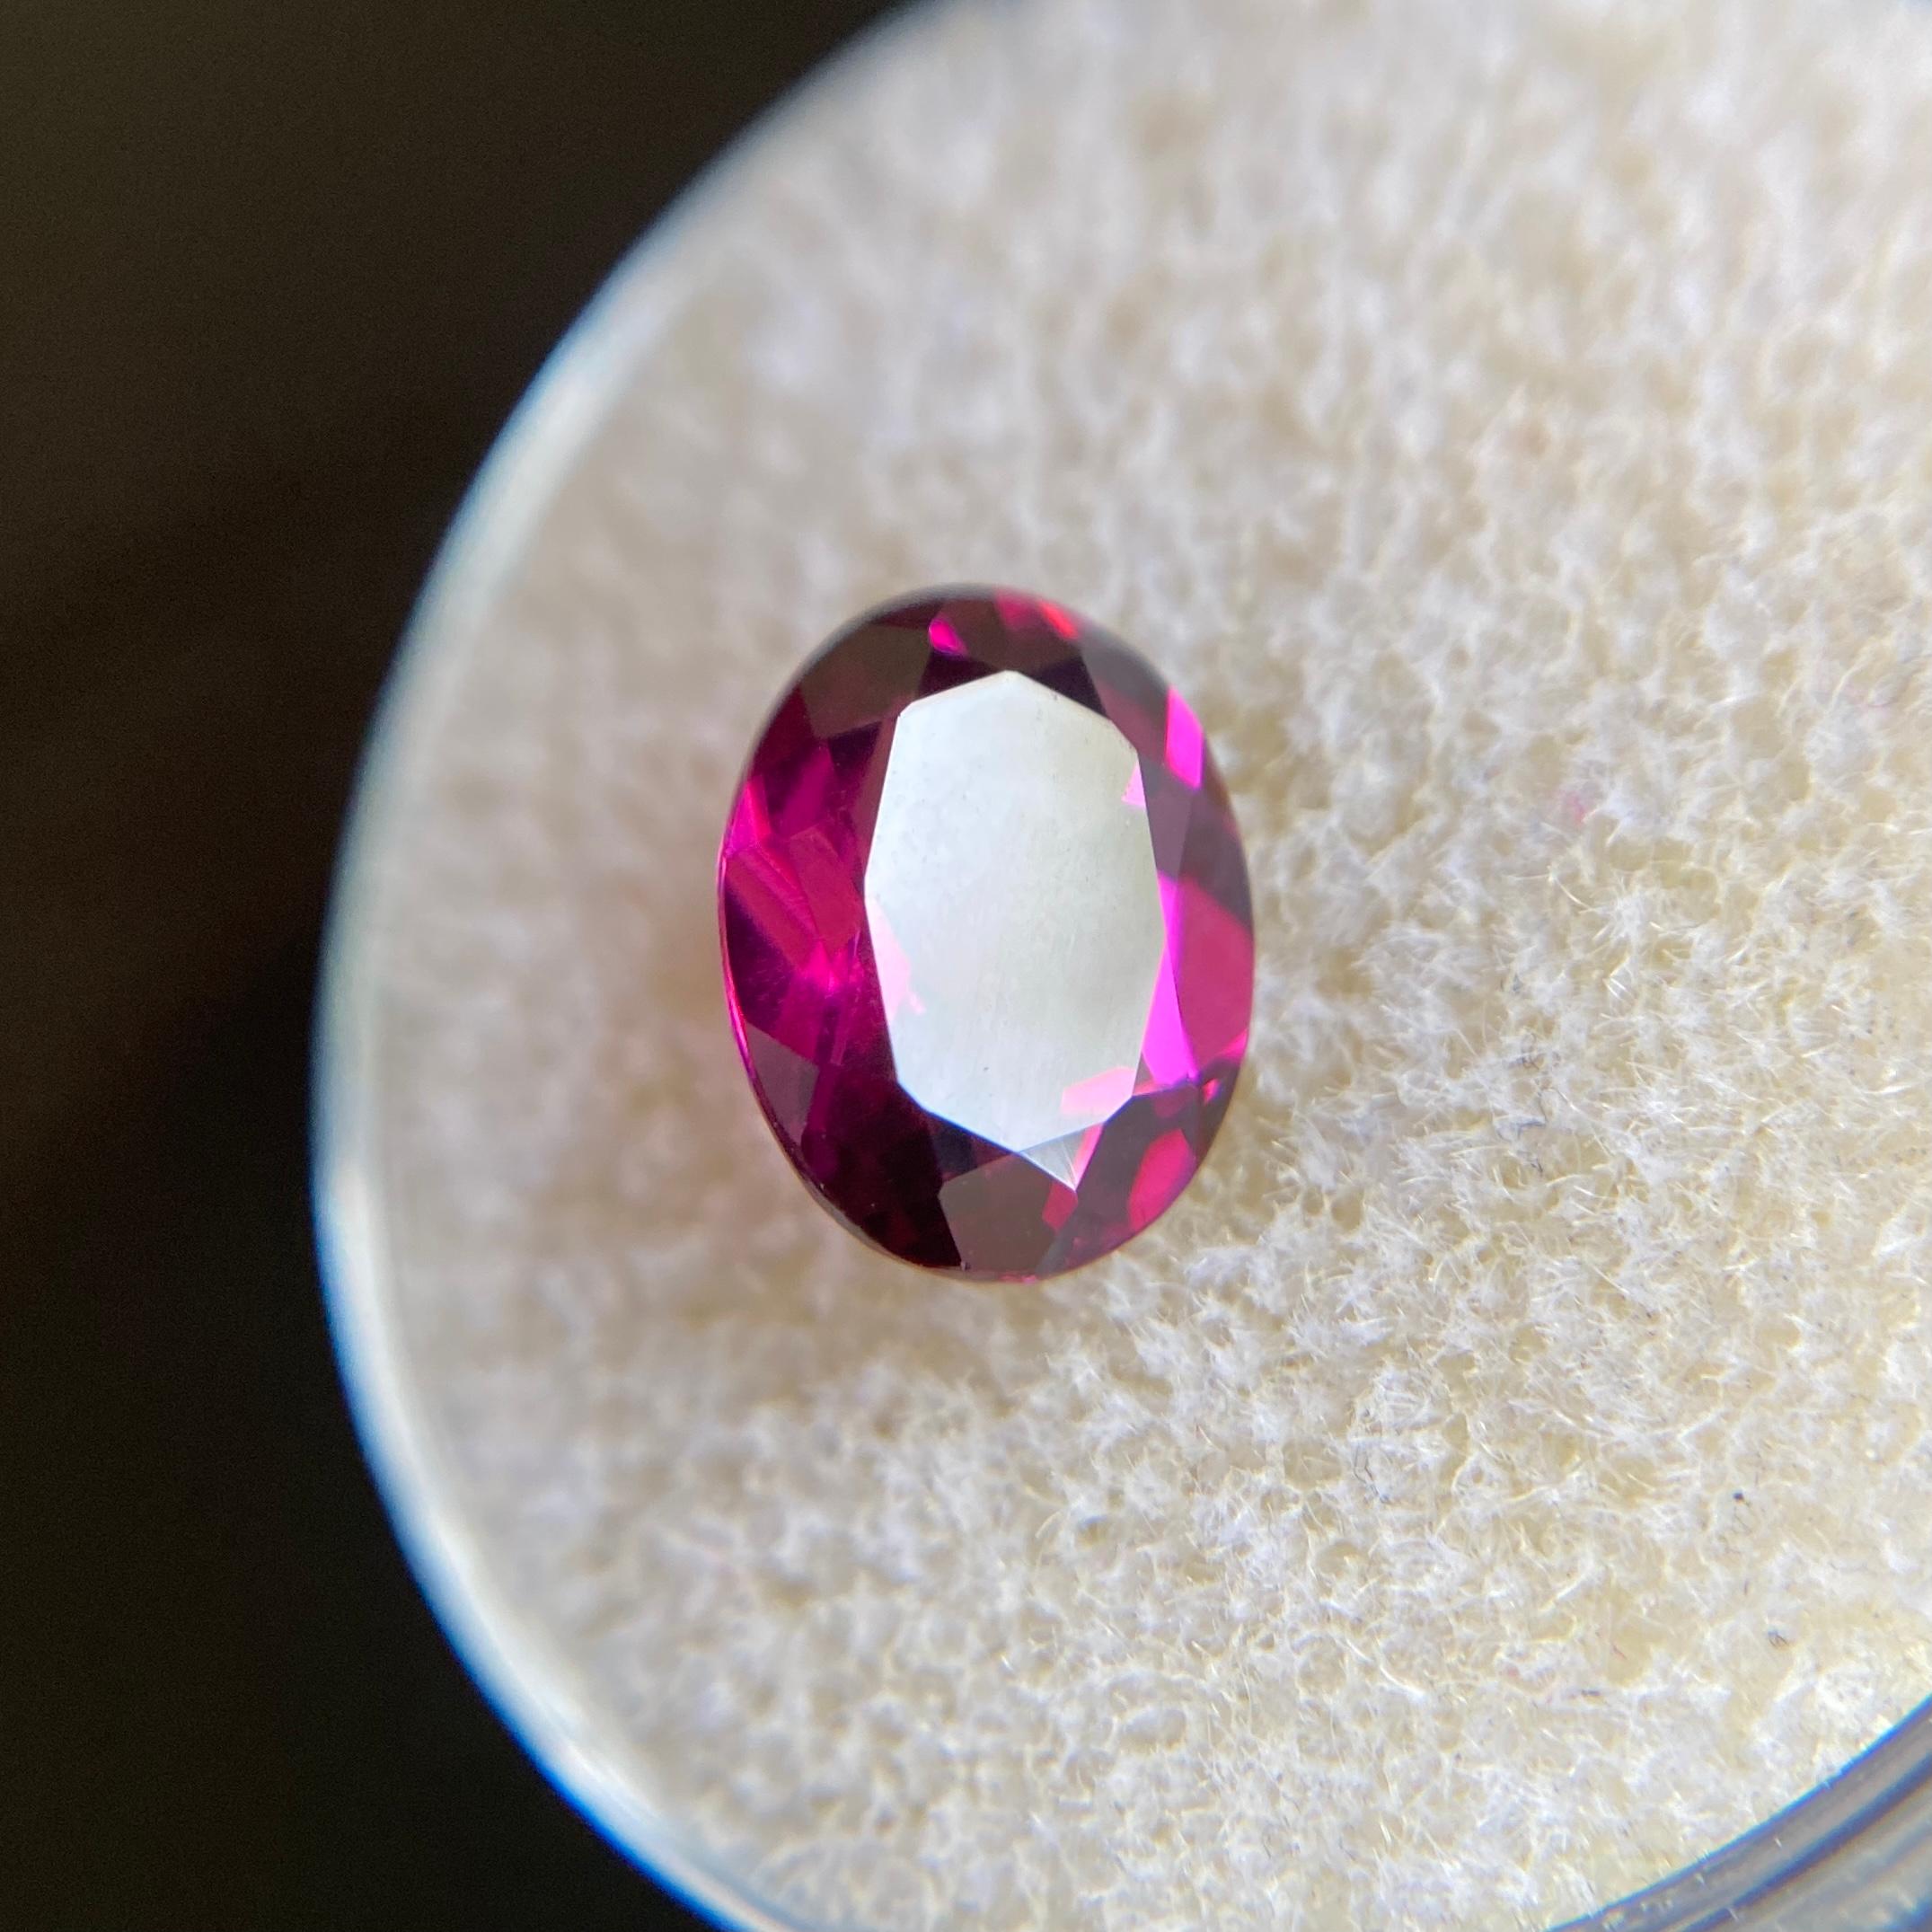 Fine Natural Rhodolite Garnet Gemstone.

2.13 Carat with a beautiful vivid purple pink colour and excellent clarity, very clean gem.

Has an excellent oval cut with good proportions and symmetry. It also has an ideal polish to show great shine and